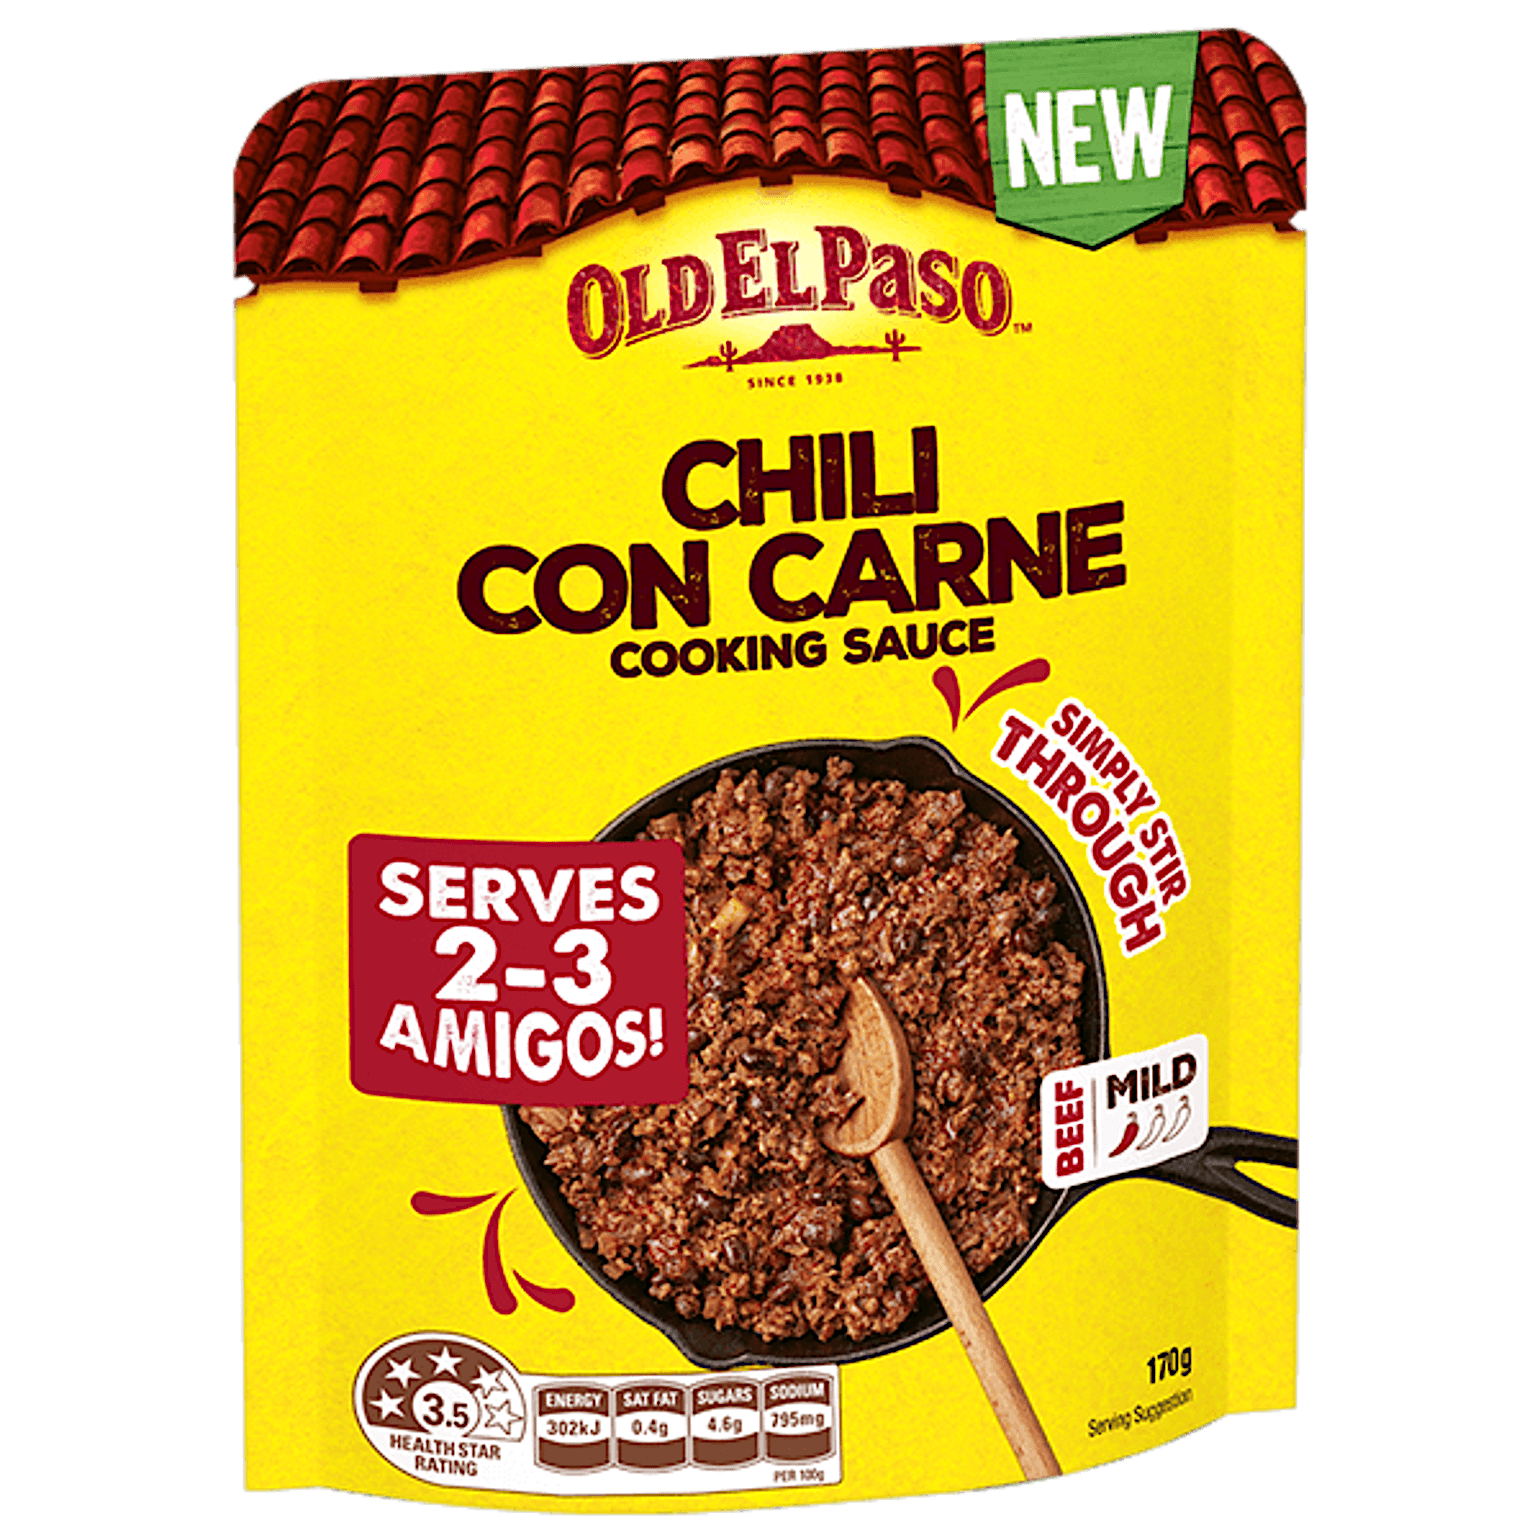 a pack of Old El Paso's chili con carne beef cooking sauce mild (170g)